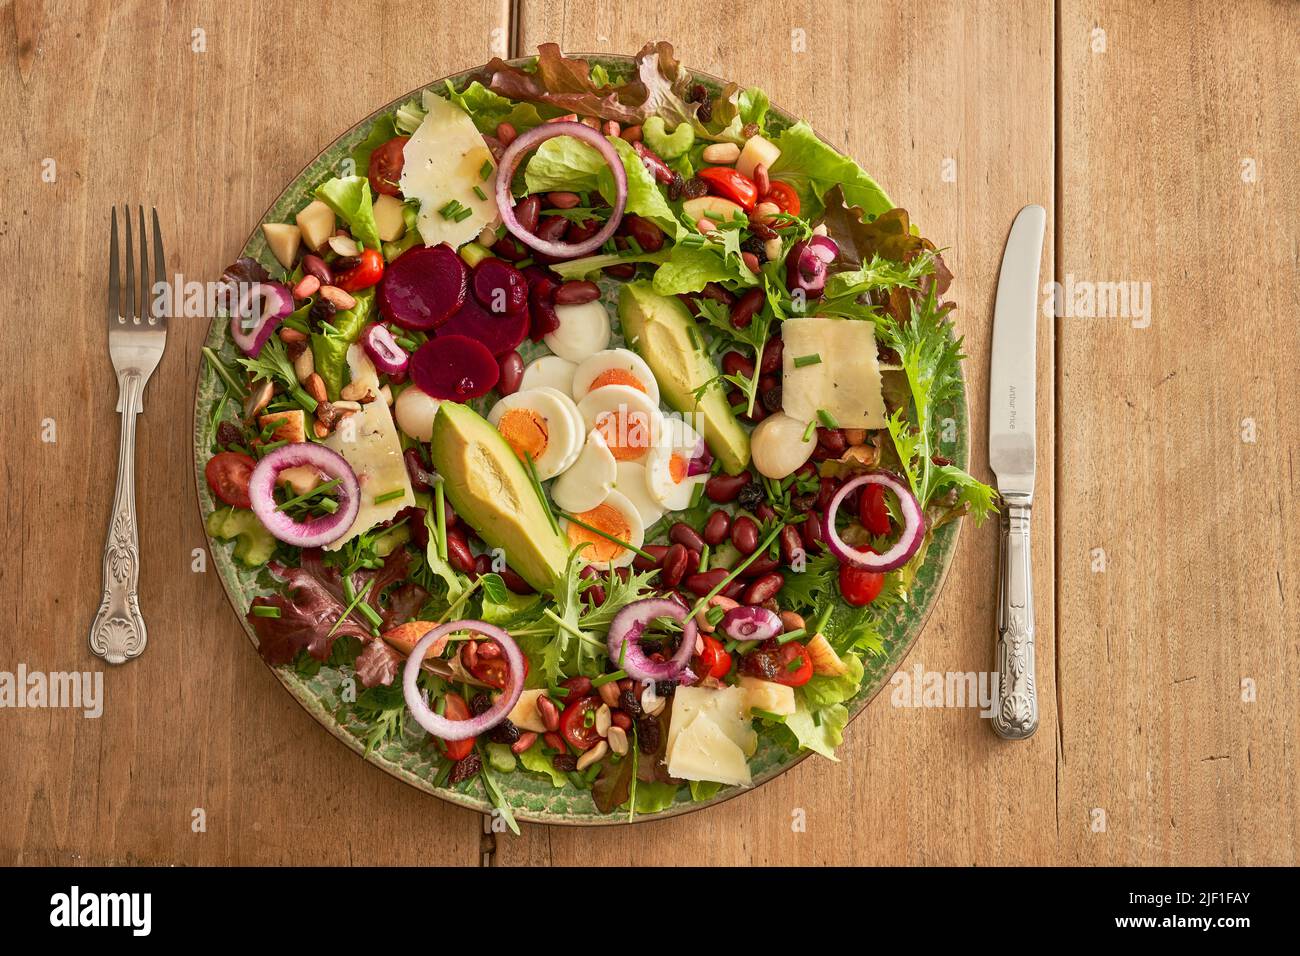 Green plate of healthy salad with knife and fork Stock Photo